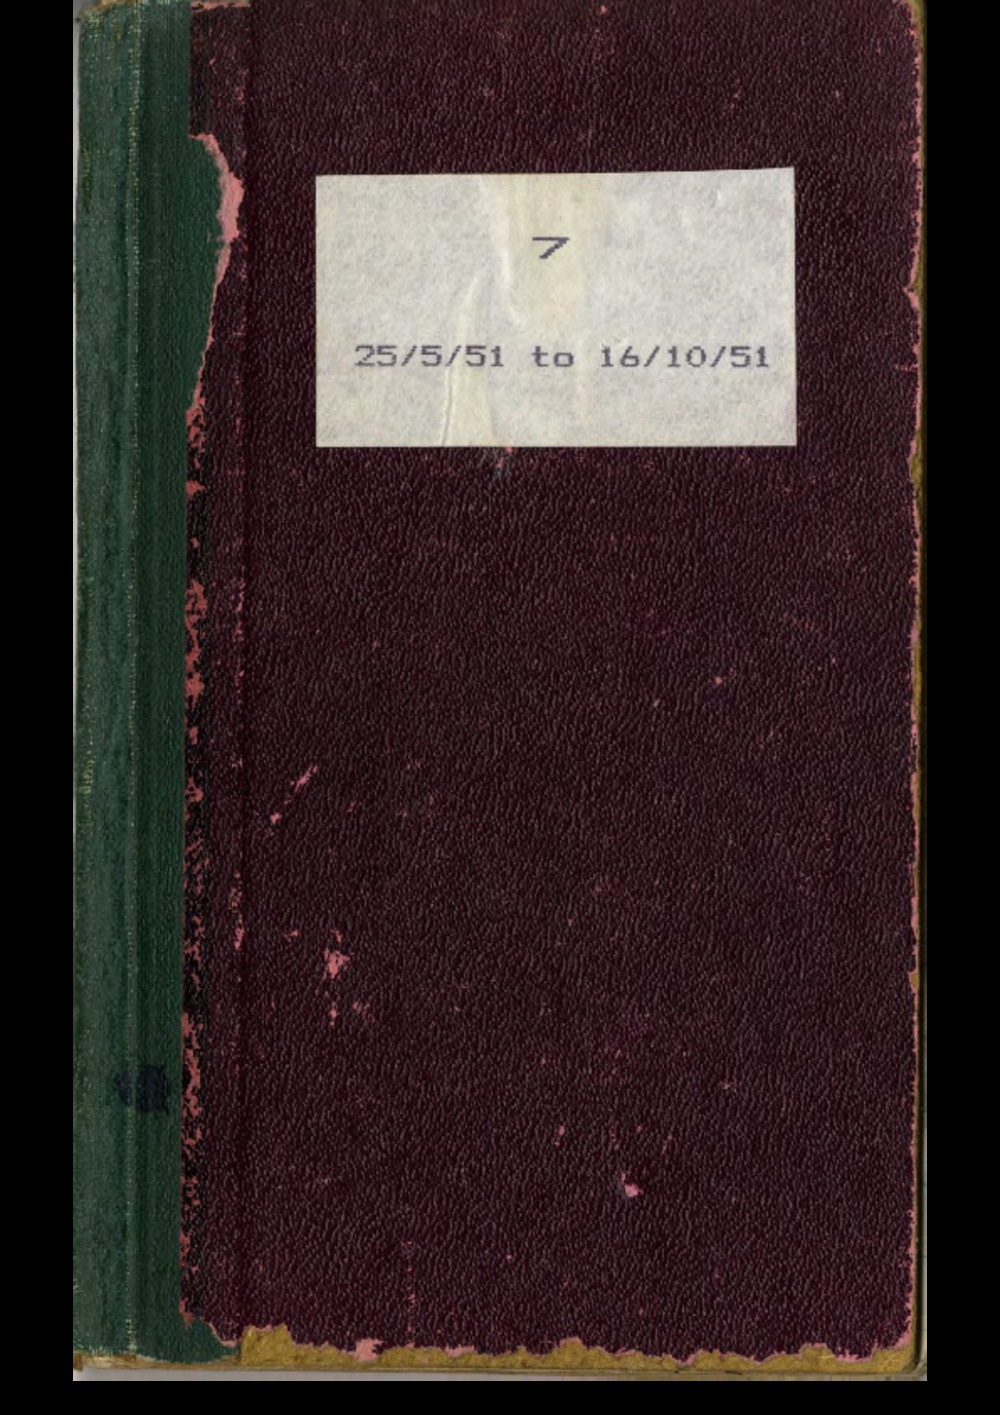 Article: Lenaerts Notebook 7 (25 May - 16 Oct 1951)